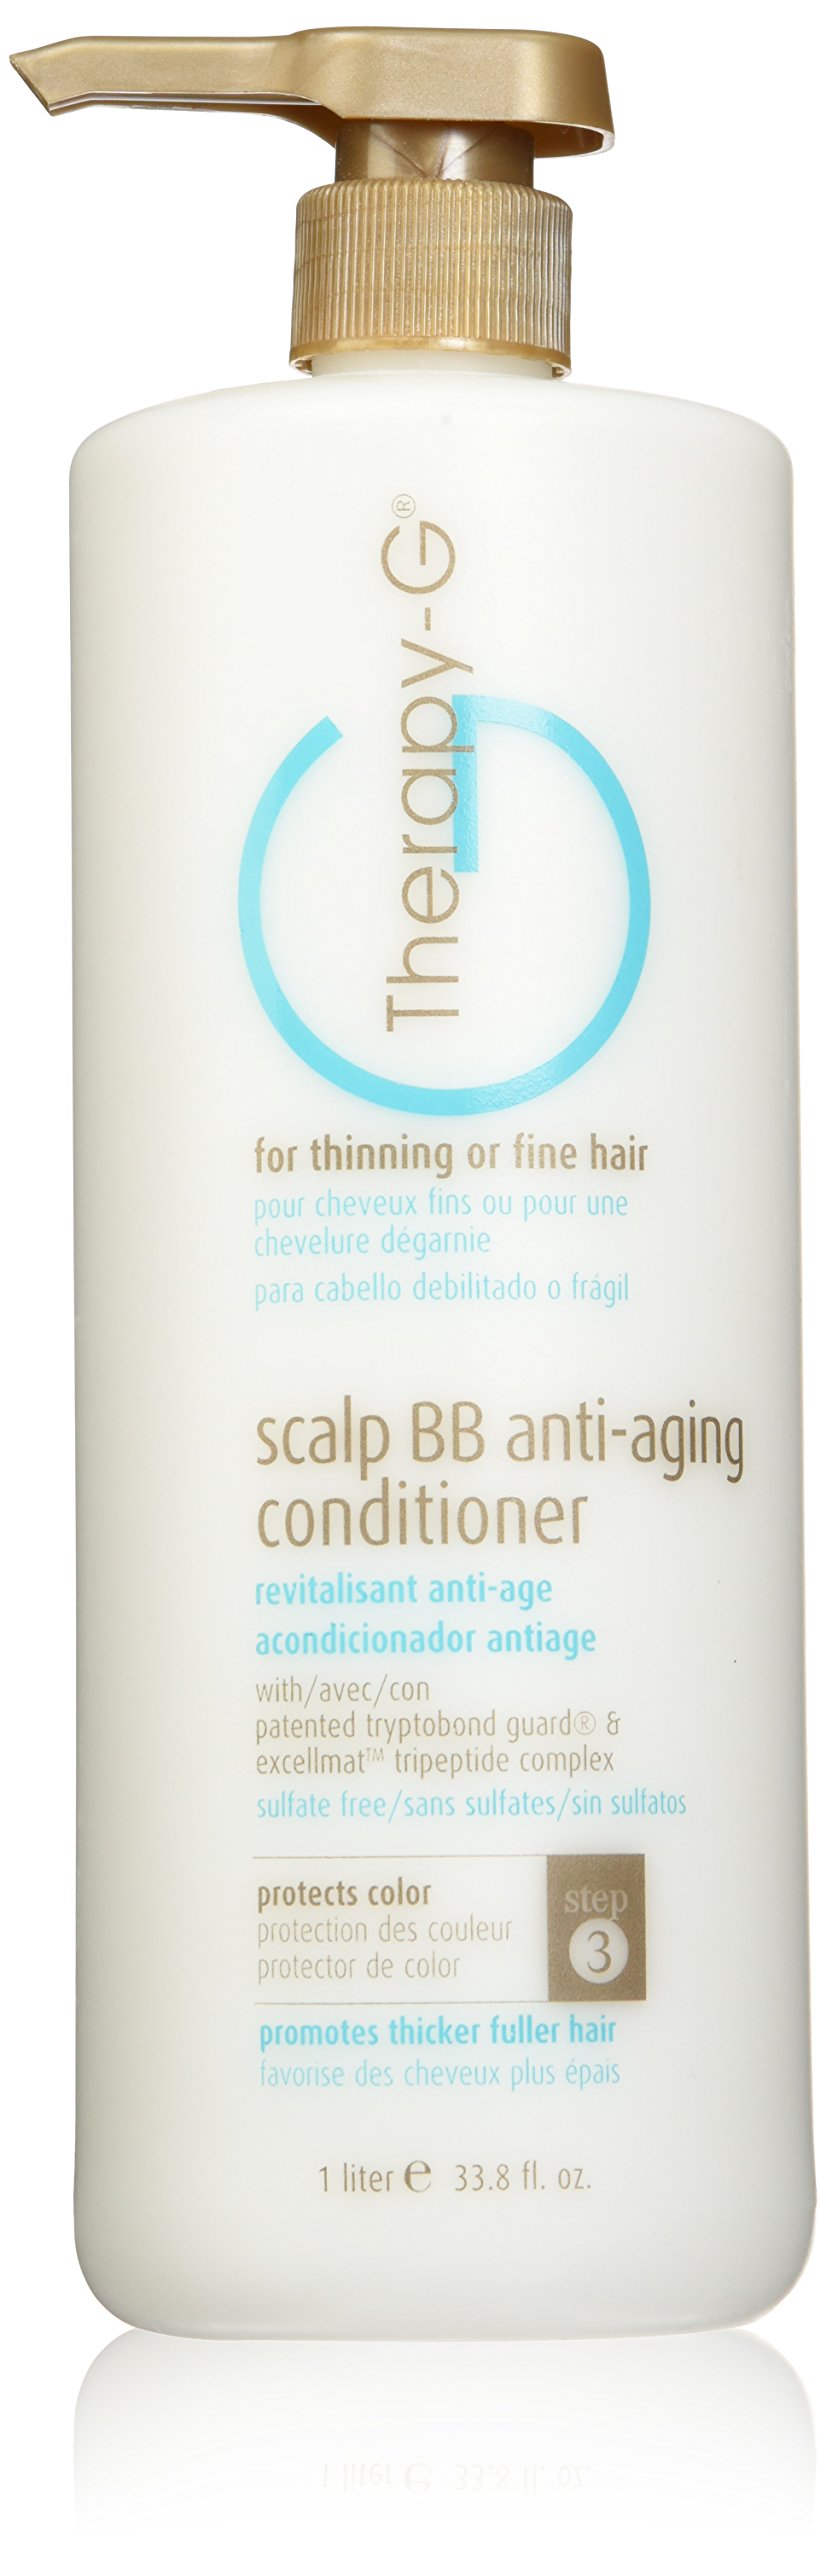 Therapy G Scalp BB Anti-Aging Conditioner for hair loss, stimulating hair regrowth, protecting hair color Liter 33.8 oz